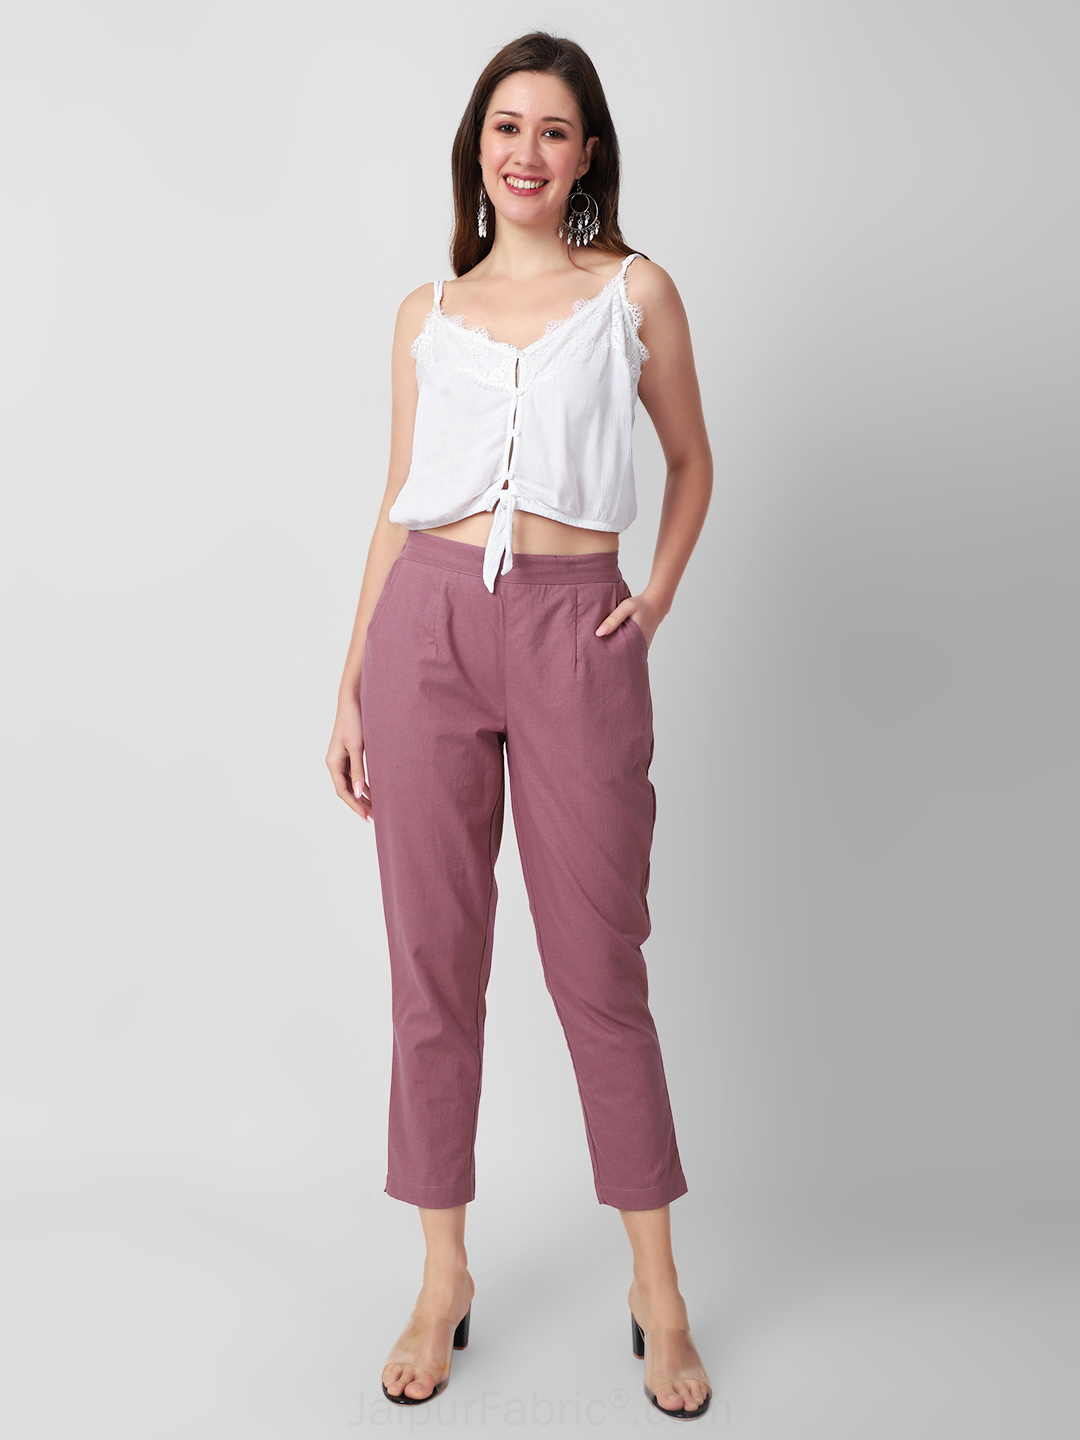 Buy SAIRISH FASHION HUB Regular Fit Cotton Pants for Women Stylish/Cotton  Pants Women/Trousers for Women (Pack of 3) (Maroon, Red, Pink) at Amazon.in